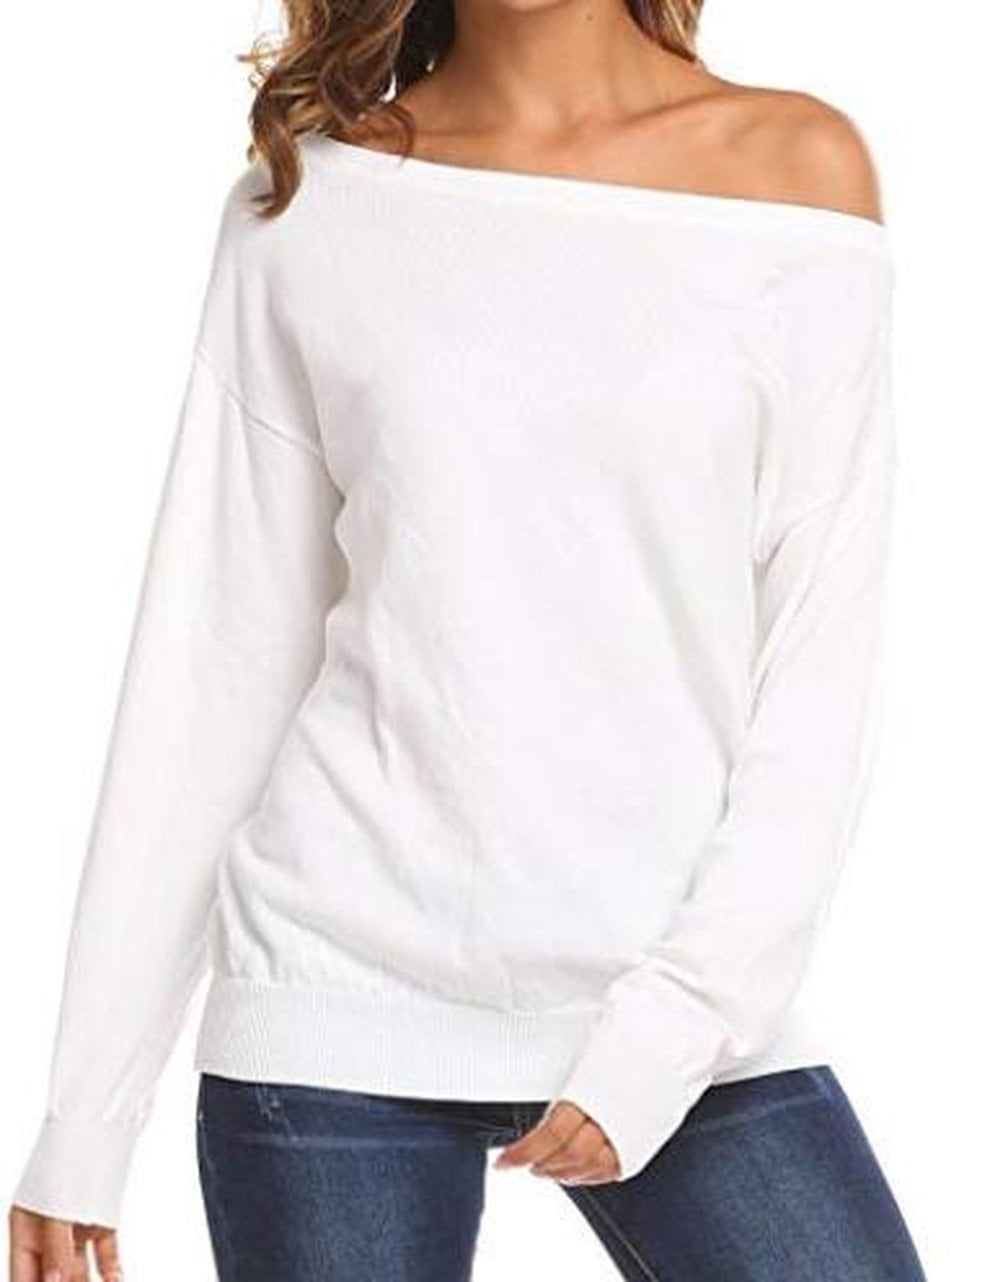 Off Shoulder Tops for Women Fashion Loose Long Sleeve Solid Casual T-Shirt Blouse Tops